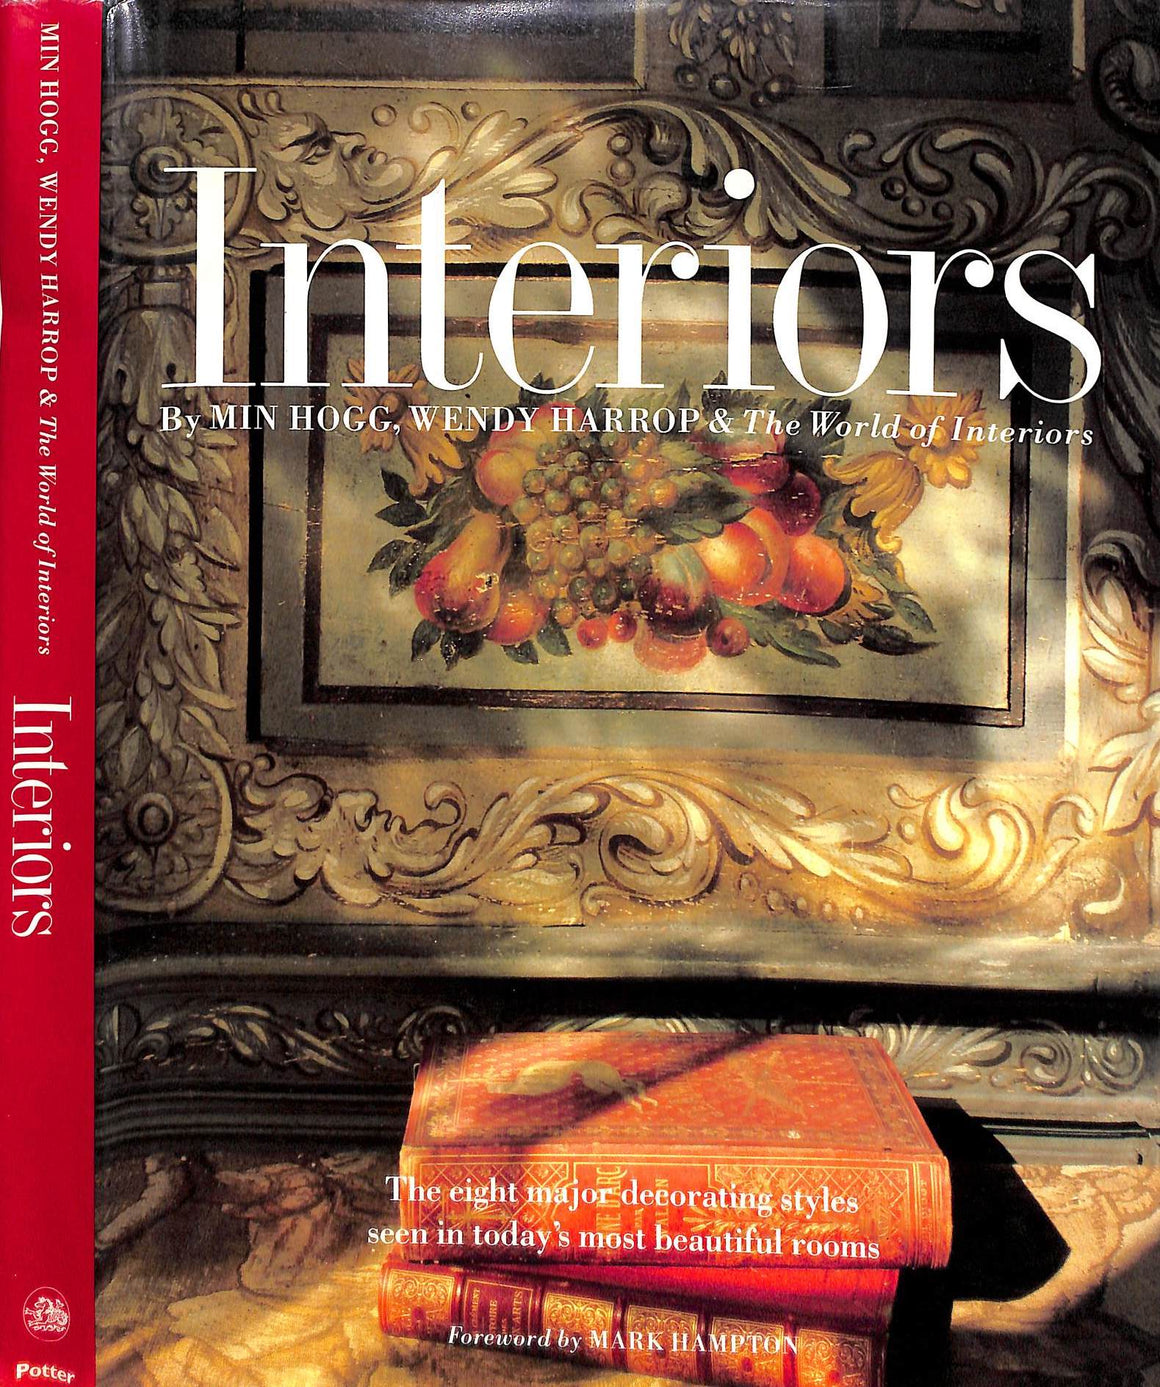 "Interiors" 1988 HOGG, Min and HARROP, Wendy (SOLD)